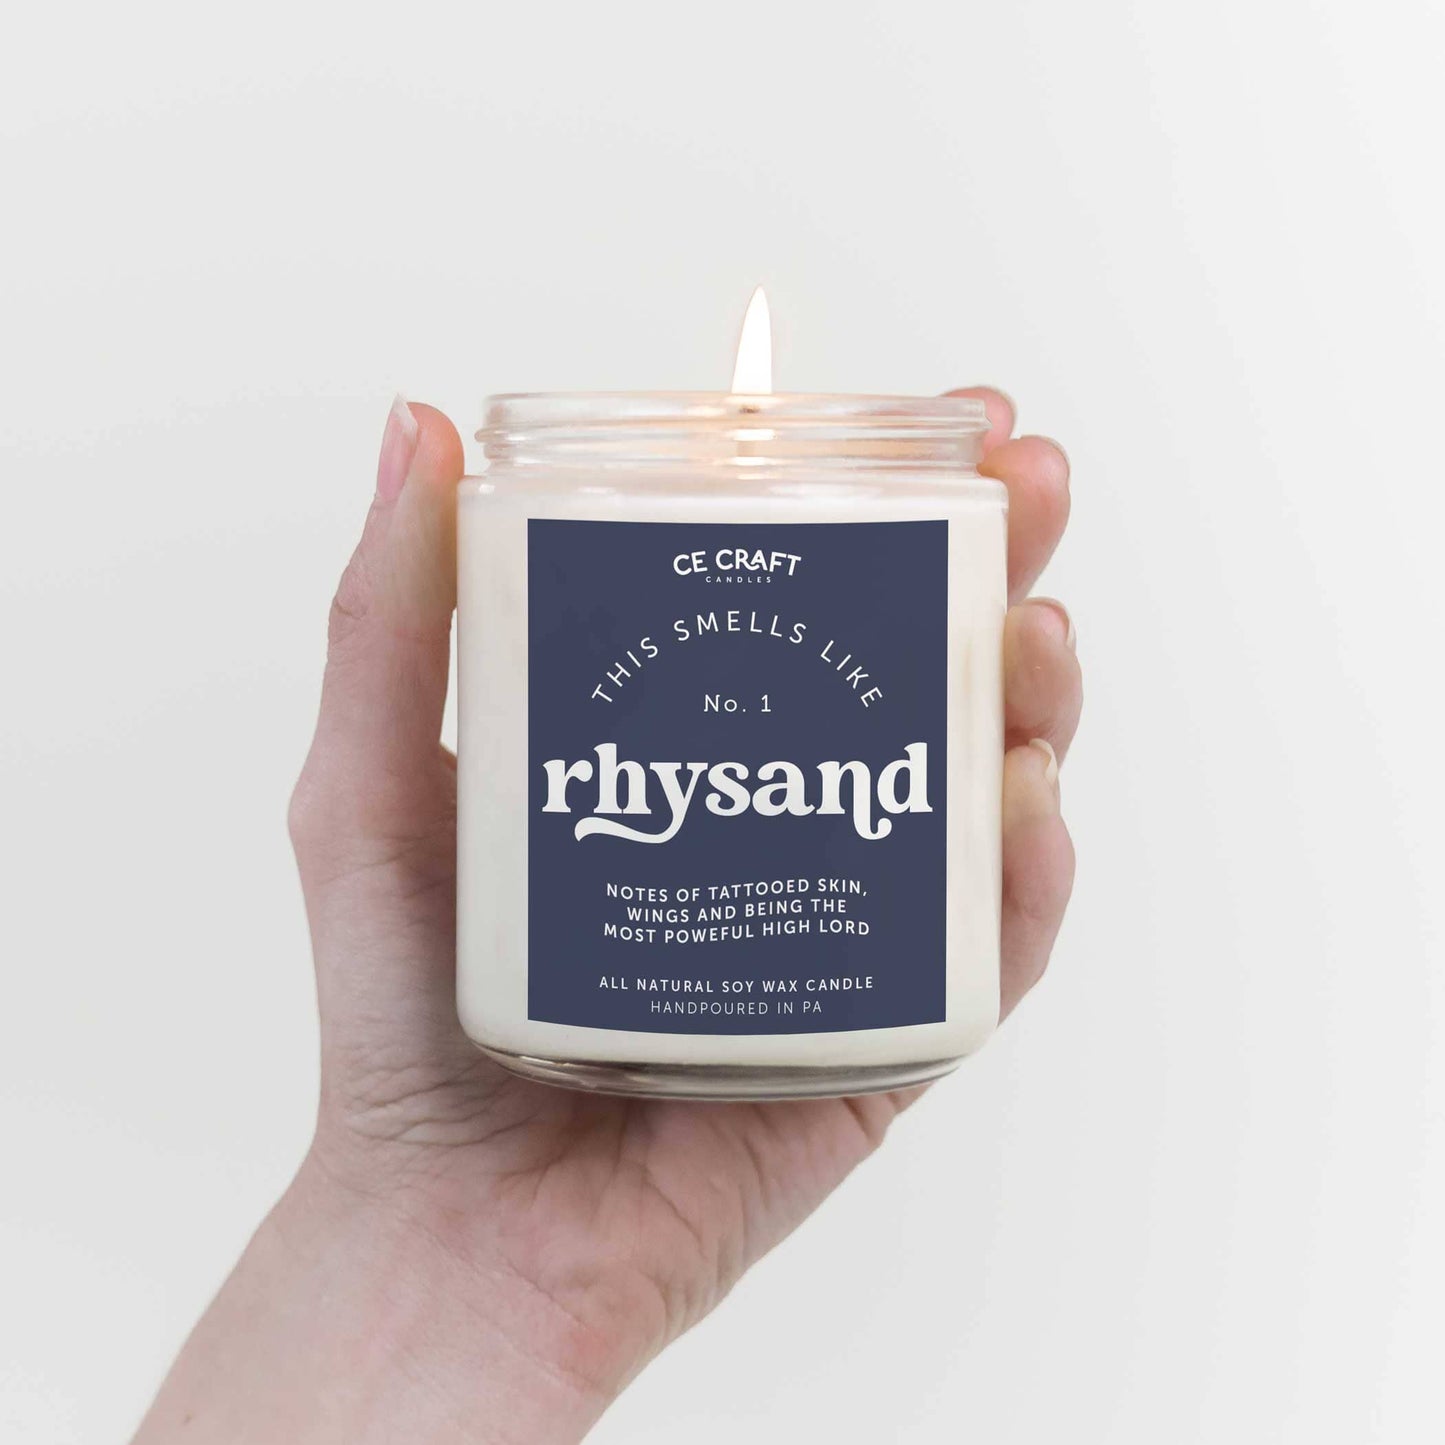 This Smells Like Rhysand Candle CE Craft Standard 